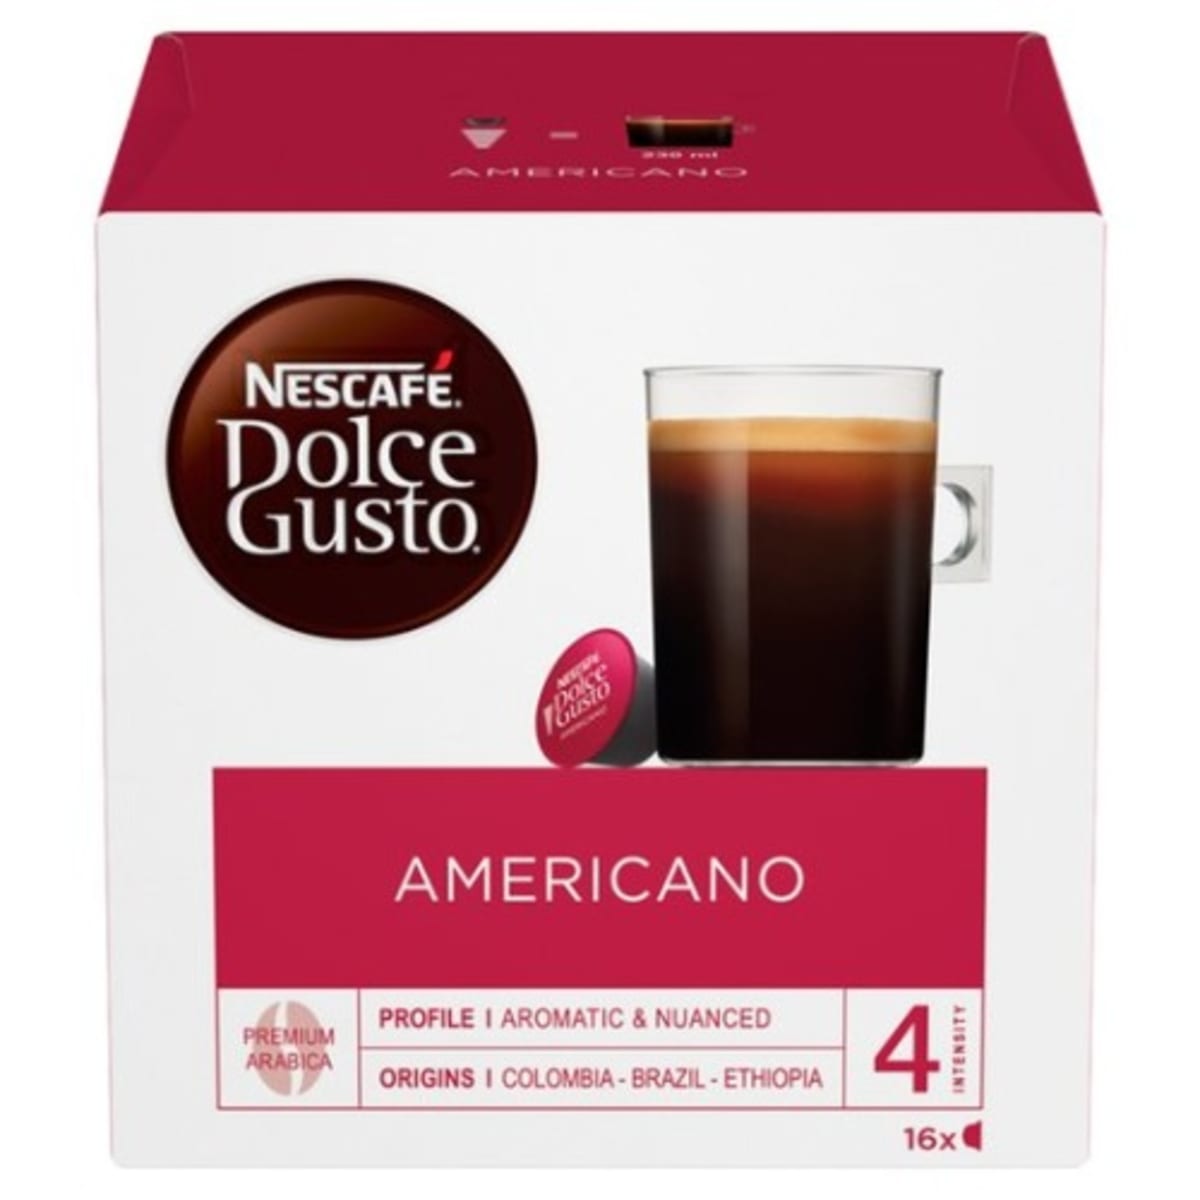 Looney Tunes Bugs' Chocolate - 10 Capsules for Dolce Gusto for €3.59.